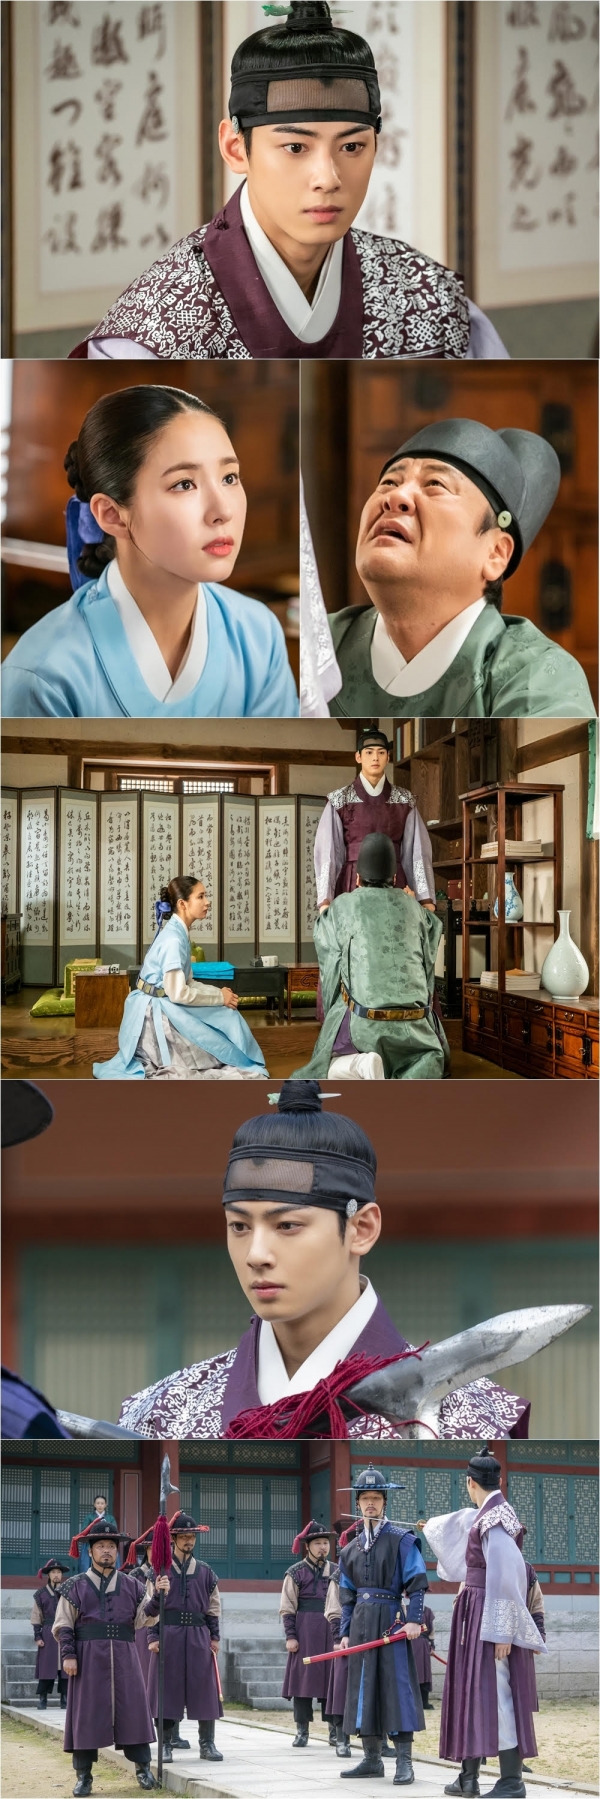 The new officer, Na Hae-ryung, runs into the truth 20 years ago.He not only ignores the dismantling of Shin Se-kyung and the Holy Land, but also shows a charismatic army, such as suppressing the gold army that blocks the front.MBC drama Na Hae-ryung (played by Kim Ho-soo / directed by Kang Il-soo, Han Hyun-hee / produced Chorokbaem Media) released the image of Lee Rim (Cha Eun-woo) approaching the truth on the 24th.Na Hae-ryung, starring Shin Se-kyung, Cha Eun-woo, and Park Ki-woong, is the first problematic first lady of Joseon (Shin Se-kyung) and the anti-war mother Solo Prince Lee Rims Phil full romance release.Lee Ji-hoon, Park Ji-hyun, and Kim Yeo-jin, Kim Min-sang, Choi Duk-moon, and Sung Ji-ru.In the 33-36th episode of Na Hae-ryung, a new employee, Lee Rim was shown to be the enemy of Lee Kyeom (Yoon Jong-hoon) of Heeyoung County, the former president of the U.S.It was also surprising that Lee was a teacher in the Hodam Teachers Exhibition, which is the center of all events.Na Hae-ryung and Irim discovered the link between Kim Il-moks Sacho and Nokseodang, which contain all the truths of the incident 20 years ago, and approached the truth and raised interest in future development.Na Hae-ryung in the public photo is looking at the Leerim of a firm eye.This is the situation where Lee Lim decided to visit Kim Yeo-jin and ask for the truth.In this regard, Heo Sam-bo (Seong Ji-ru) of the inner circle holds I-rims leg and begs begging him not to go to the preparations, while I-rim is turning away from him, which makes him sad.Then, while Na Hae-ryung and Sambo were heading for the preparations, Irim was restrained by the gold army.Soon, Irim is aiming at the gold soldiers who stop him, and he is shooting charisma that can not be tolerated, amplifying the tension.As such, Lee Lim is foreseeing that he will run into the past 20 years ago as the enemy of the King Hee Young-gun, and the truth will be revealed and what kind of blue will happen.I am going to visit Lim in preparation for the release of Na Hae-ryung and Sambo, said Na Hae-ryung, a new employee. I would like to ask for your attention until the end of the conversation with Lim, who is the only relative of his family.Shin Se-kyung, Cha Eun-woo and Park Ki-woong will appear on Wednesday, 25th at 8:55 pm 37-38 times.chorokbaem media